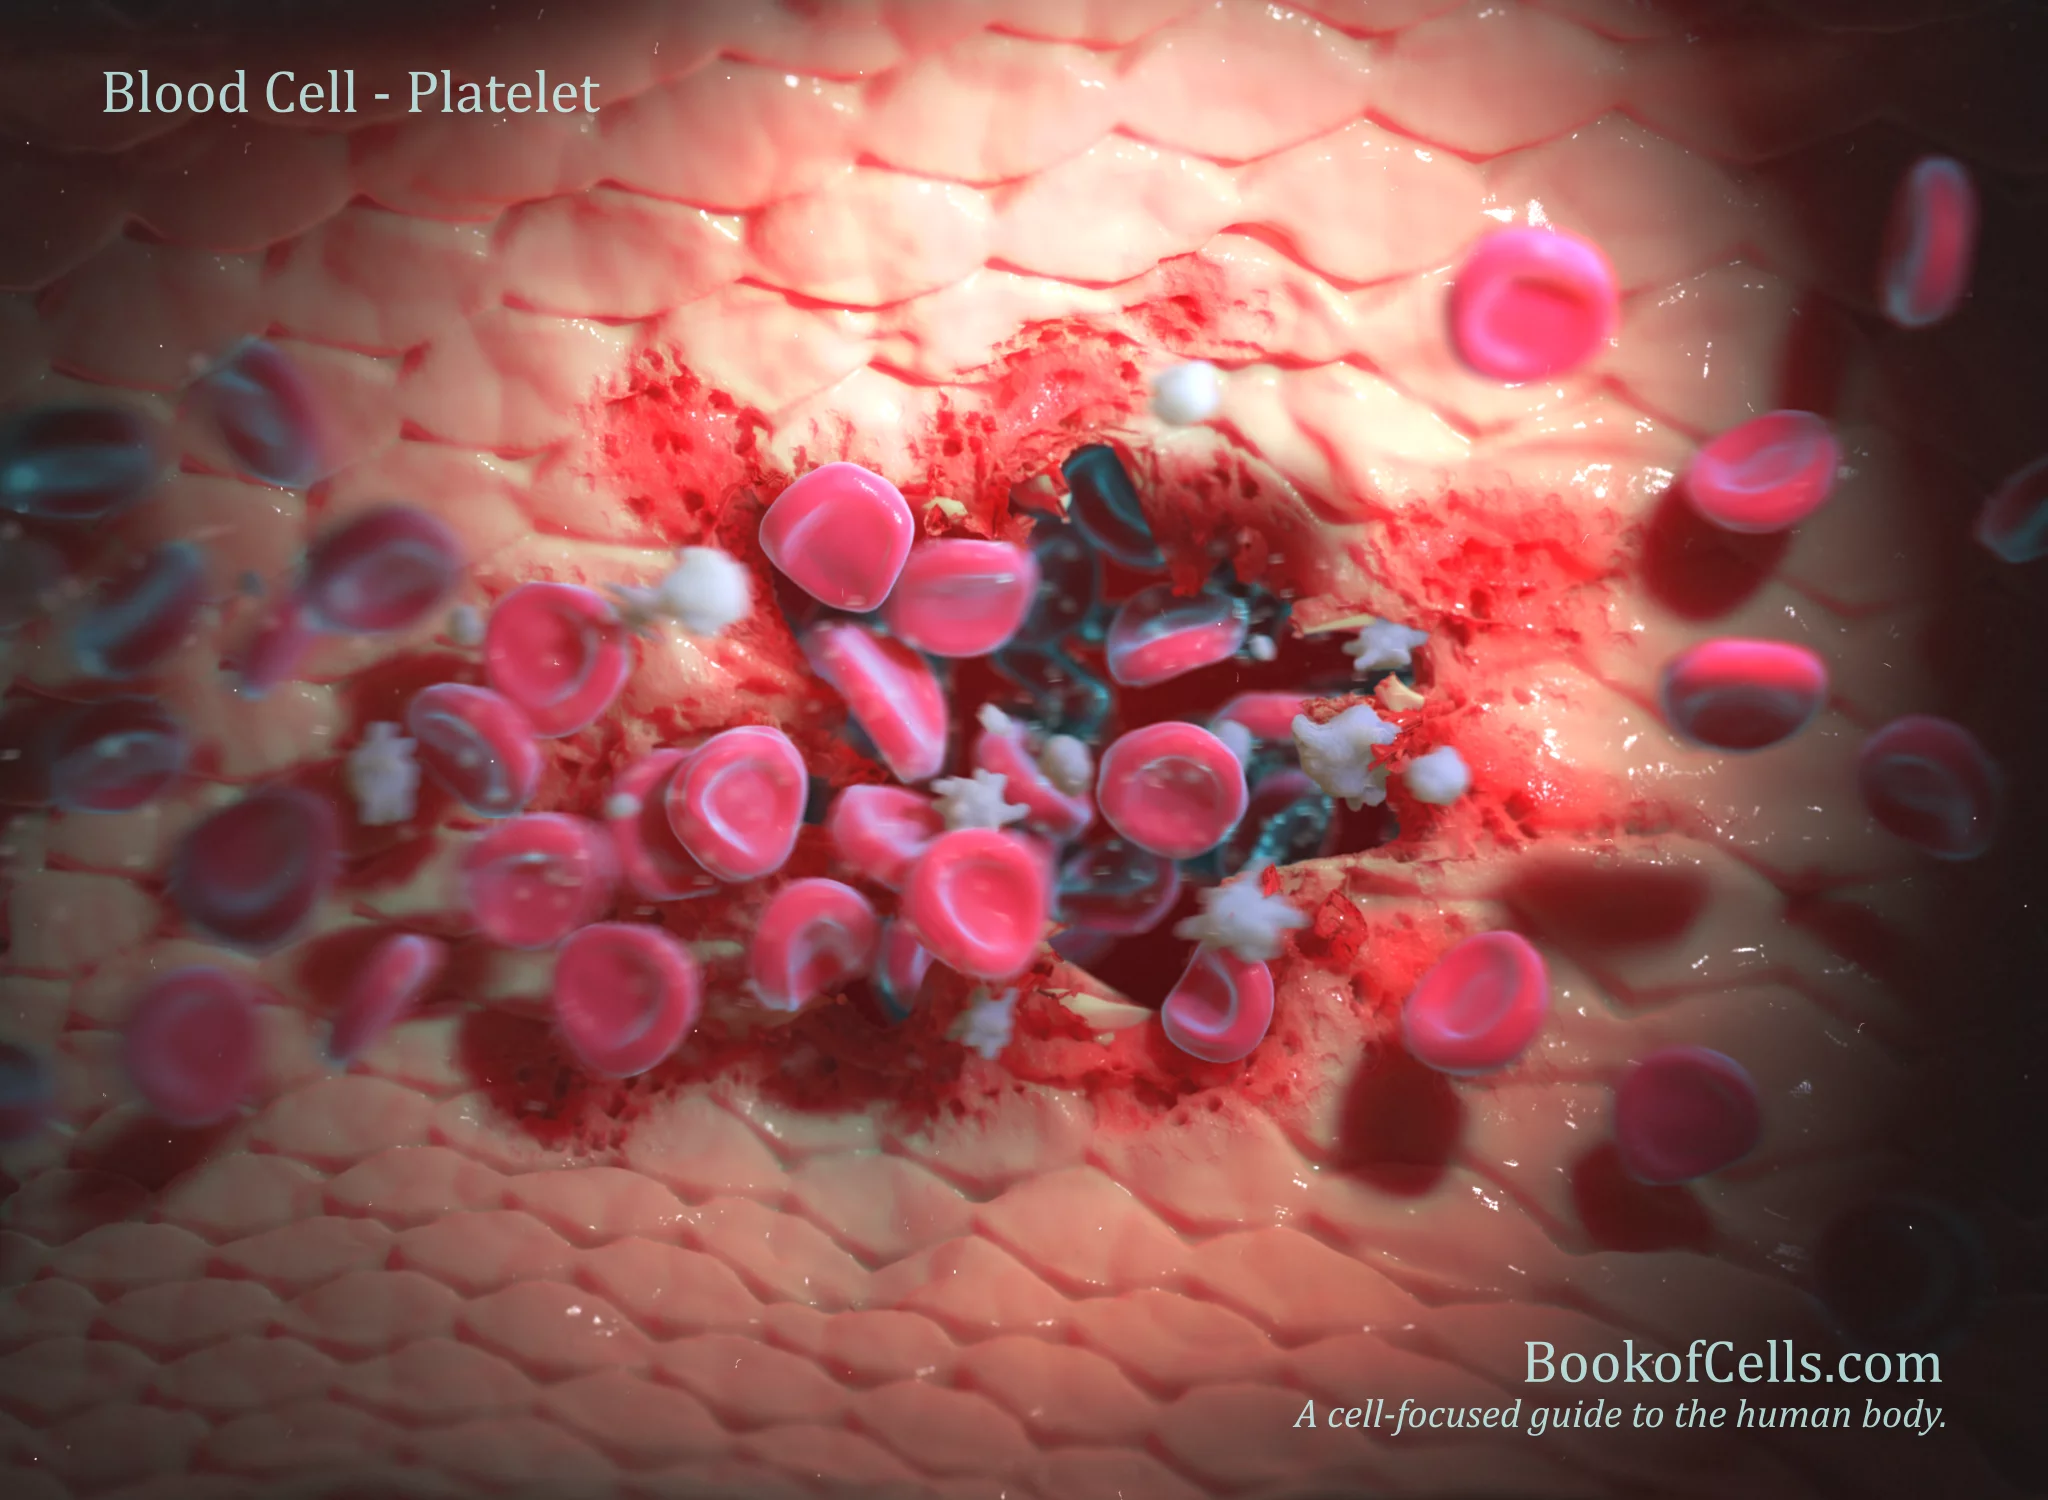 3d rendering of the inside of a damaged blood vessel showing the activation process of platelet the cells.